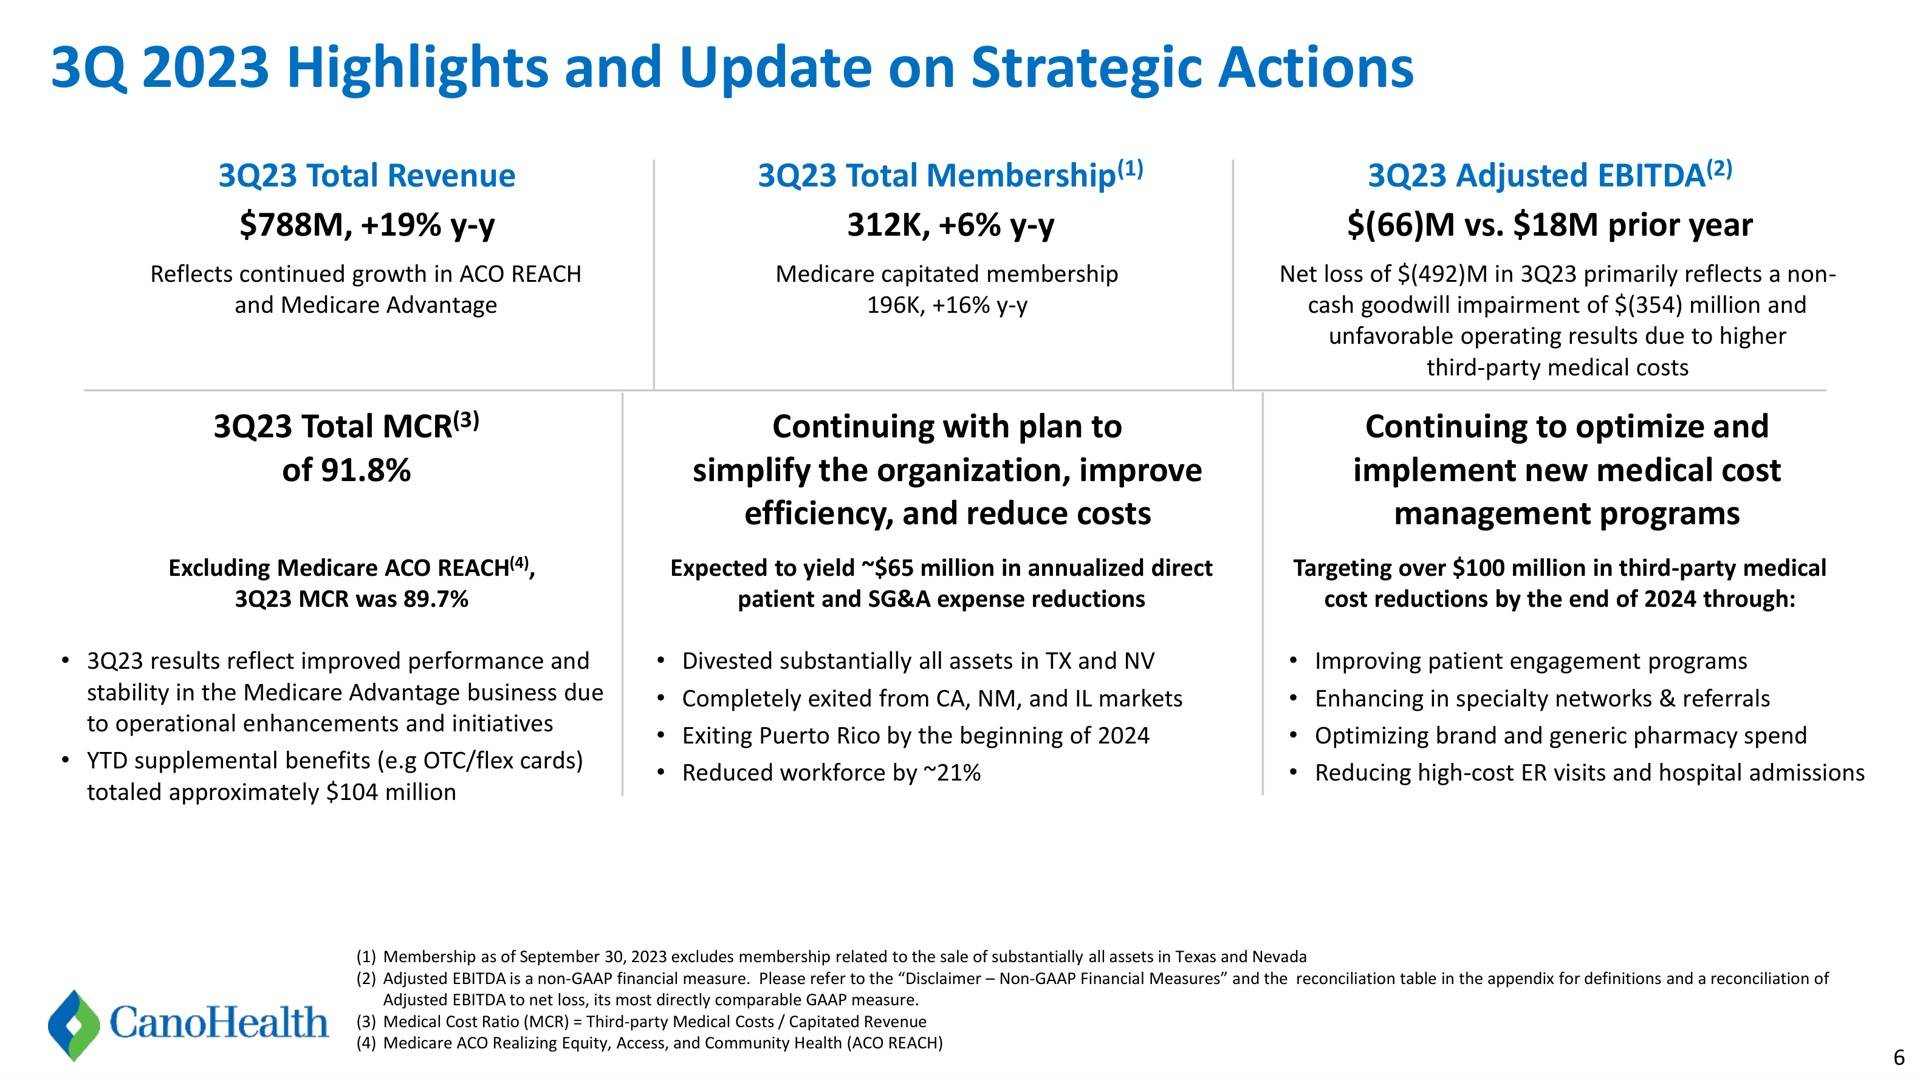 highlights and update on strategic actions prior year | Cano Health